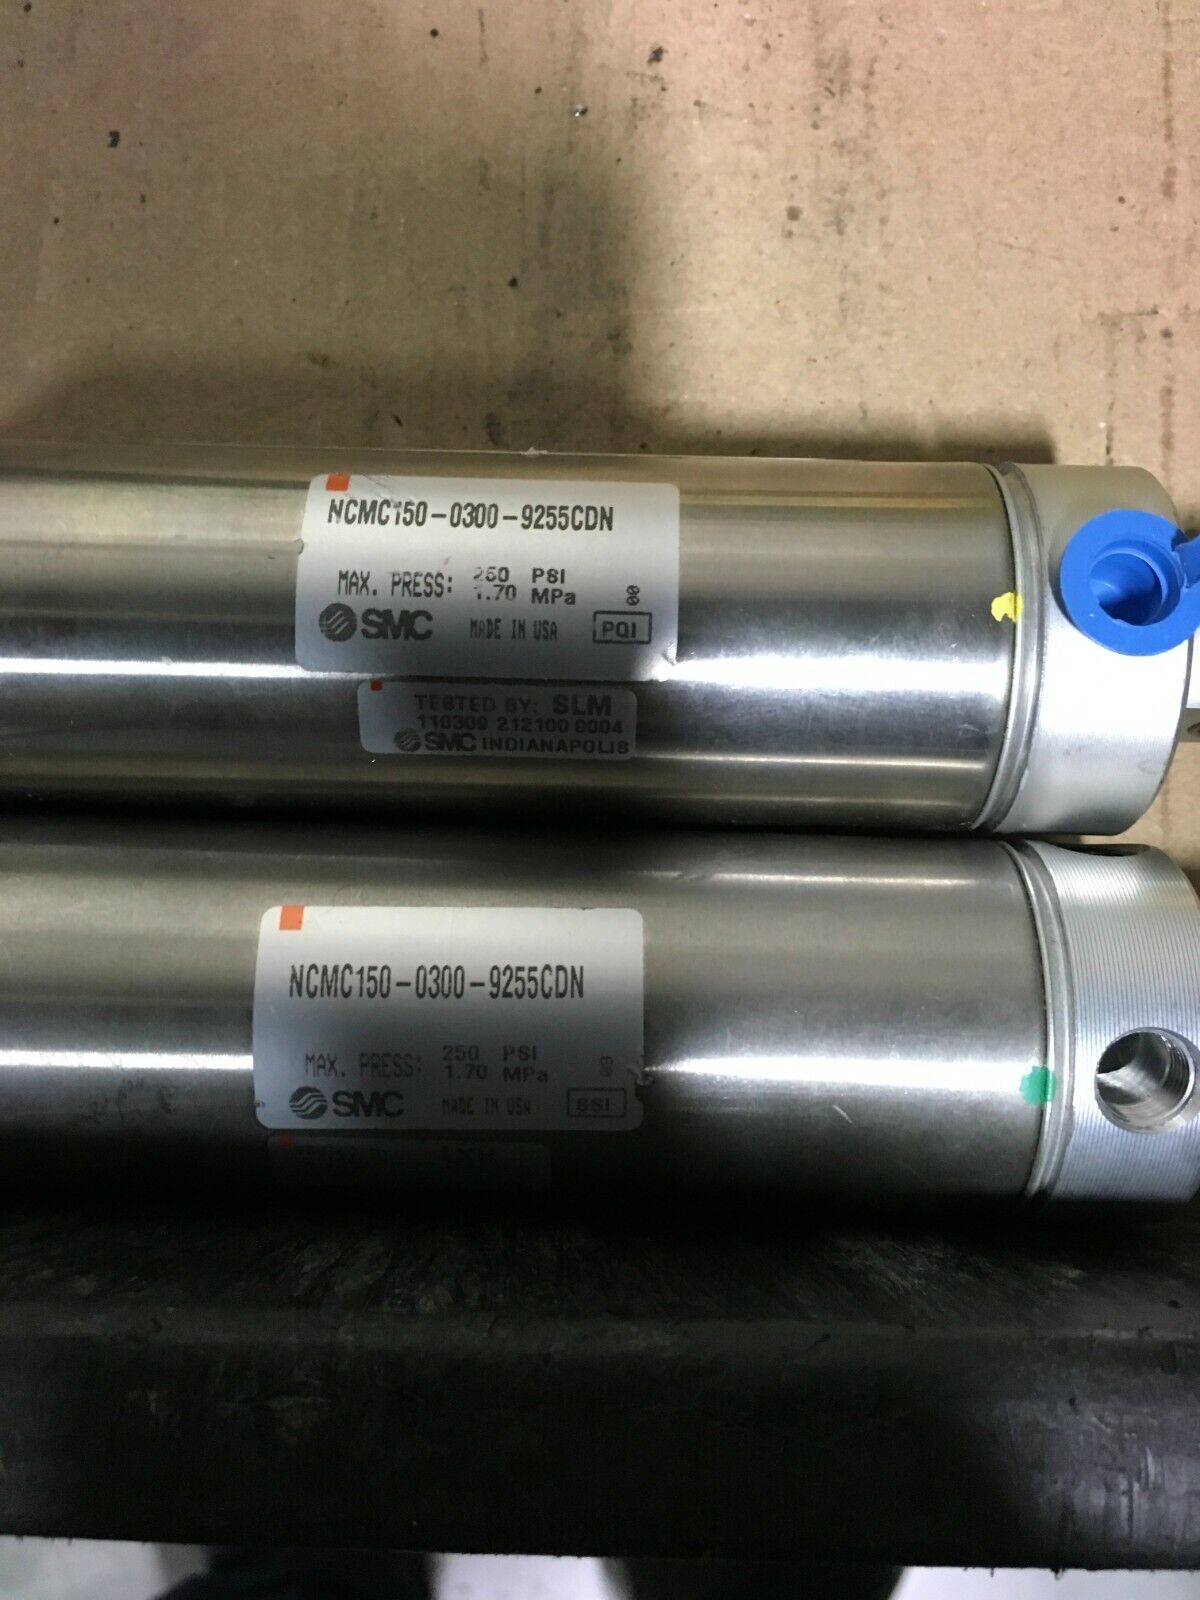 SMC Cylinder NCMC150-0300-9255CDN 250psi Safety and trust Los Angeles Mall